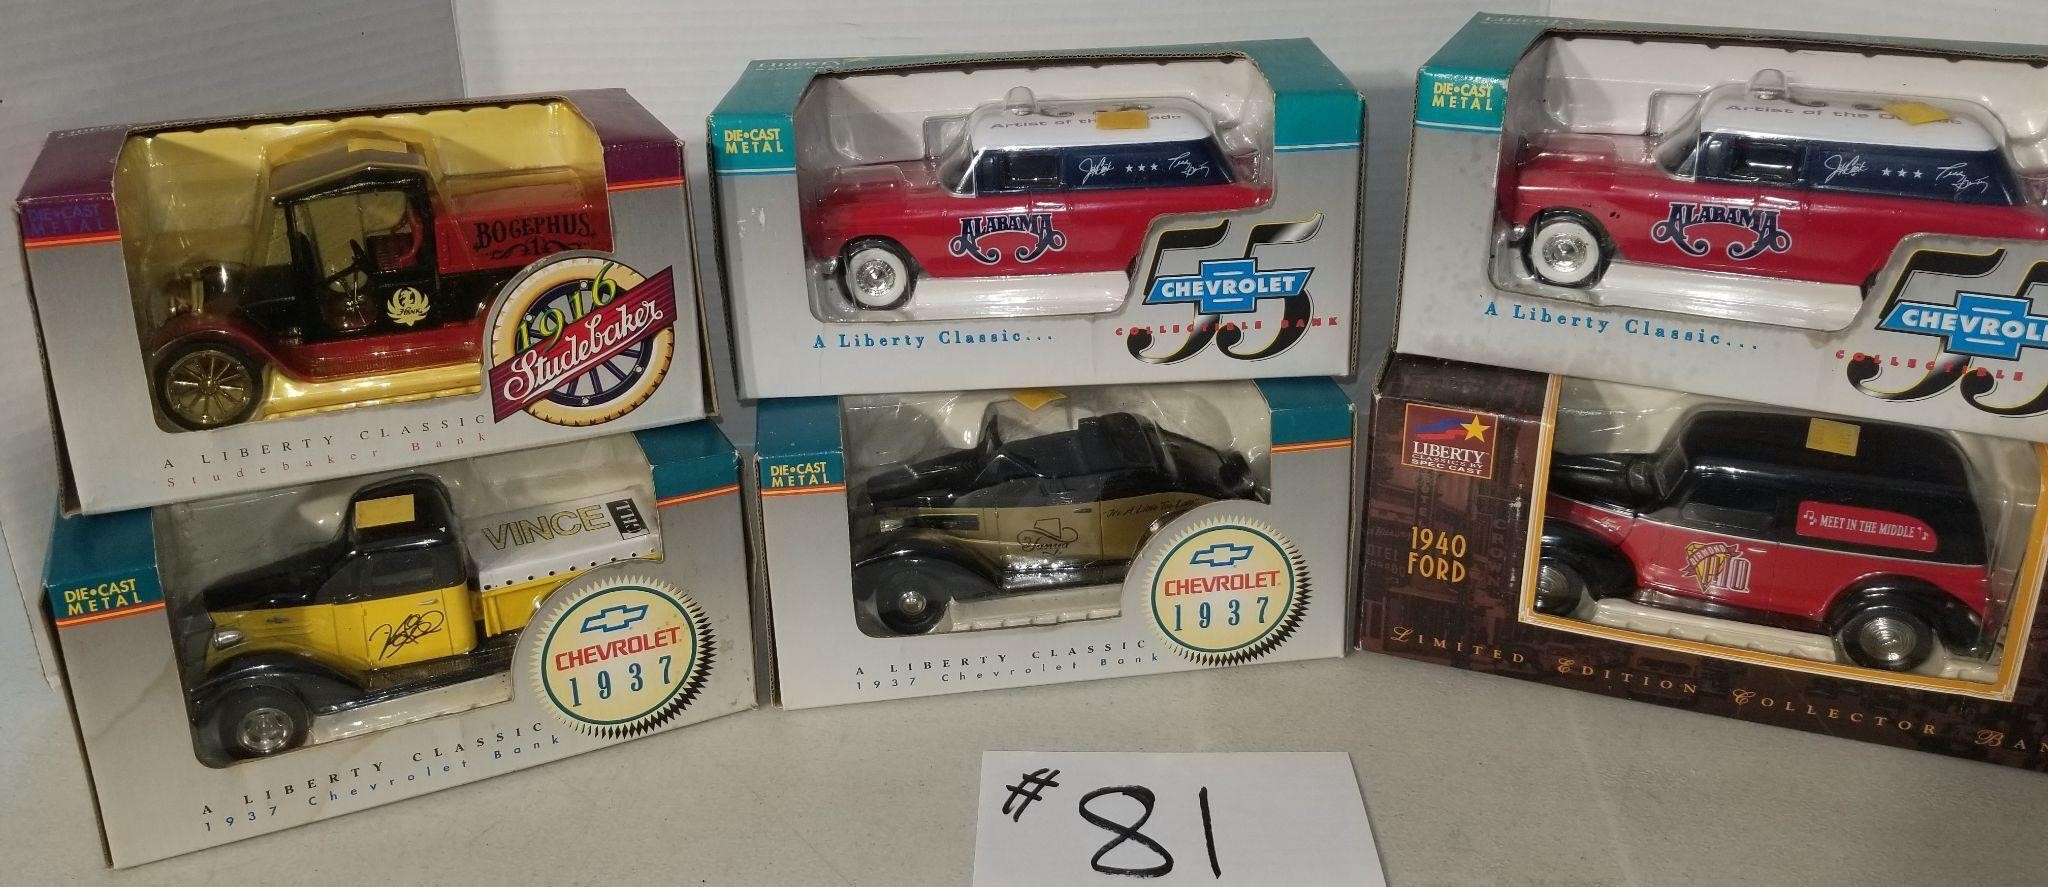 6 Liberty Die Cast Cars 1:24 scale,